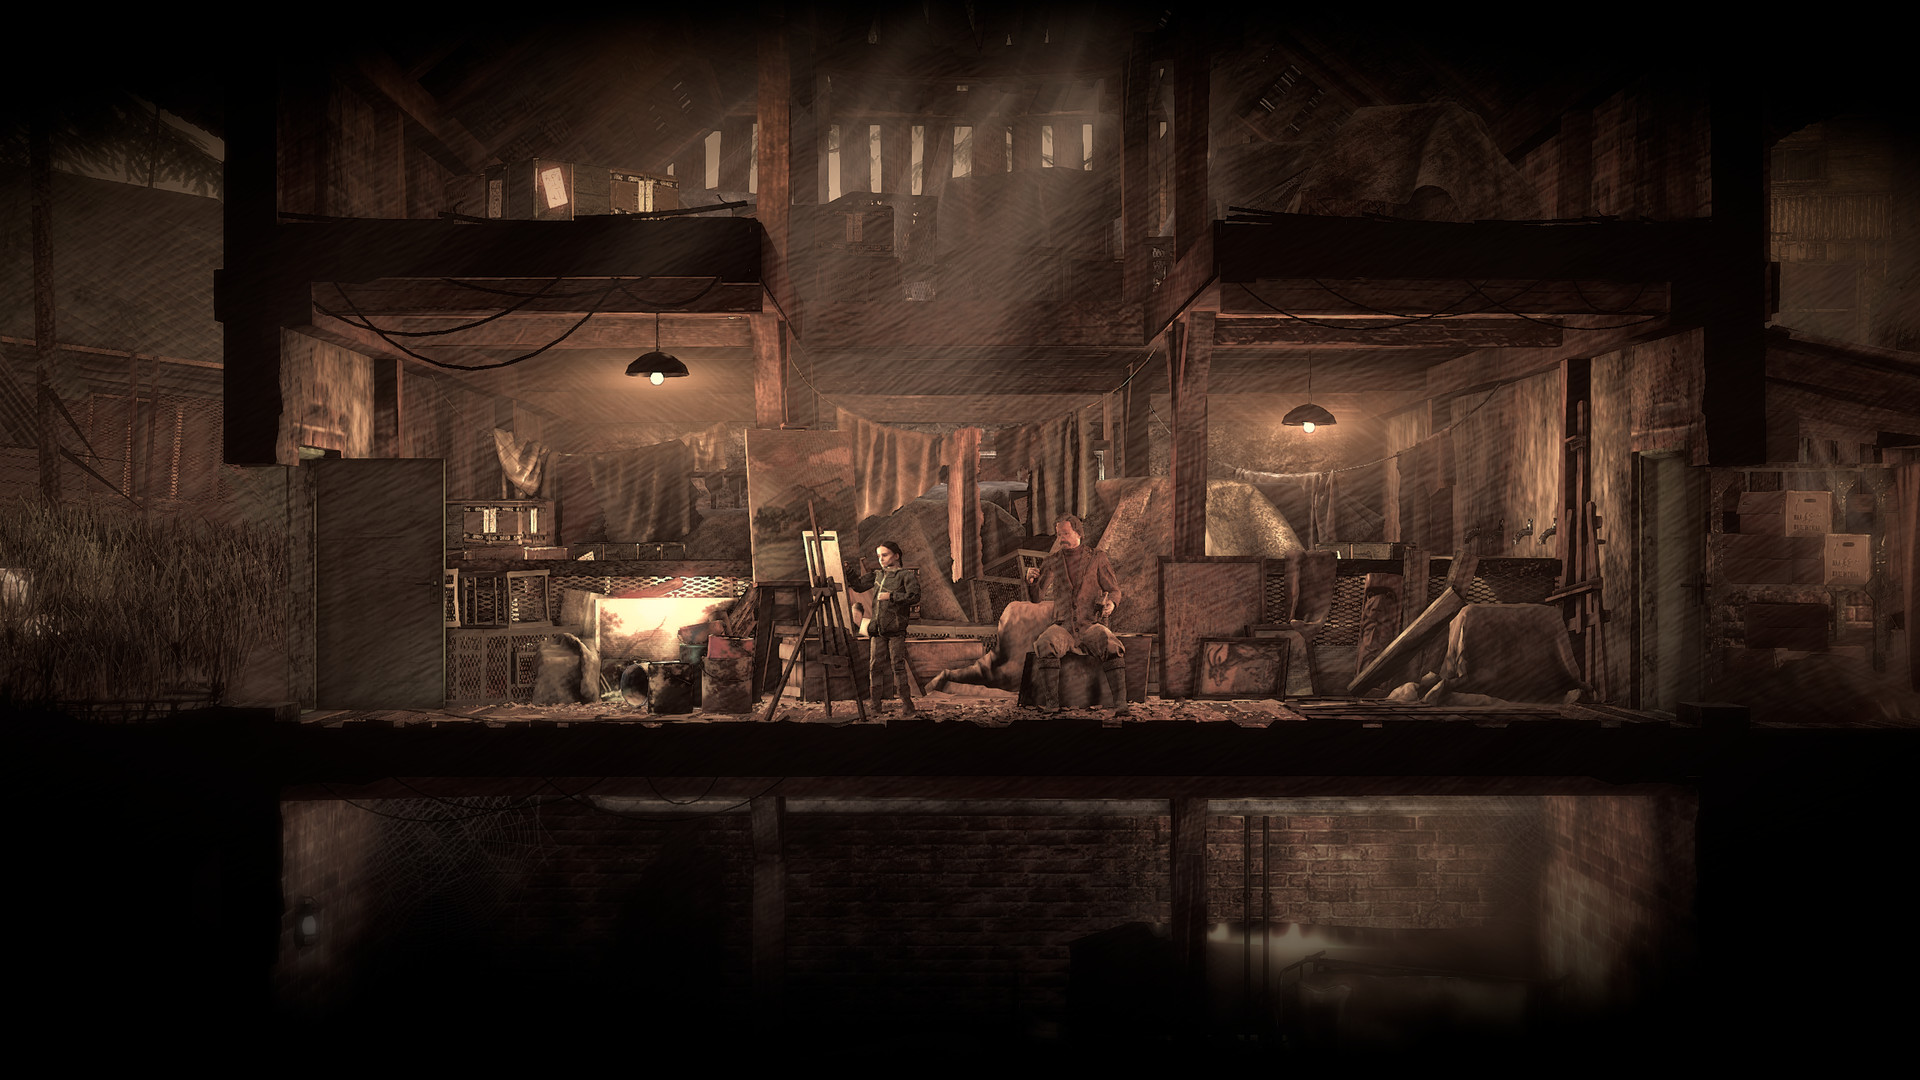 This War of Mine: Stories - Fading Embers (ep. 3) Featured Screenshot #1